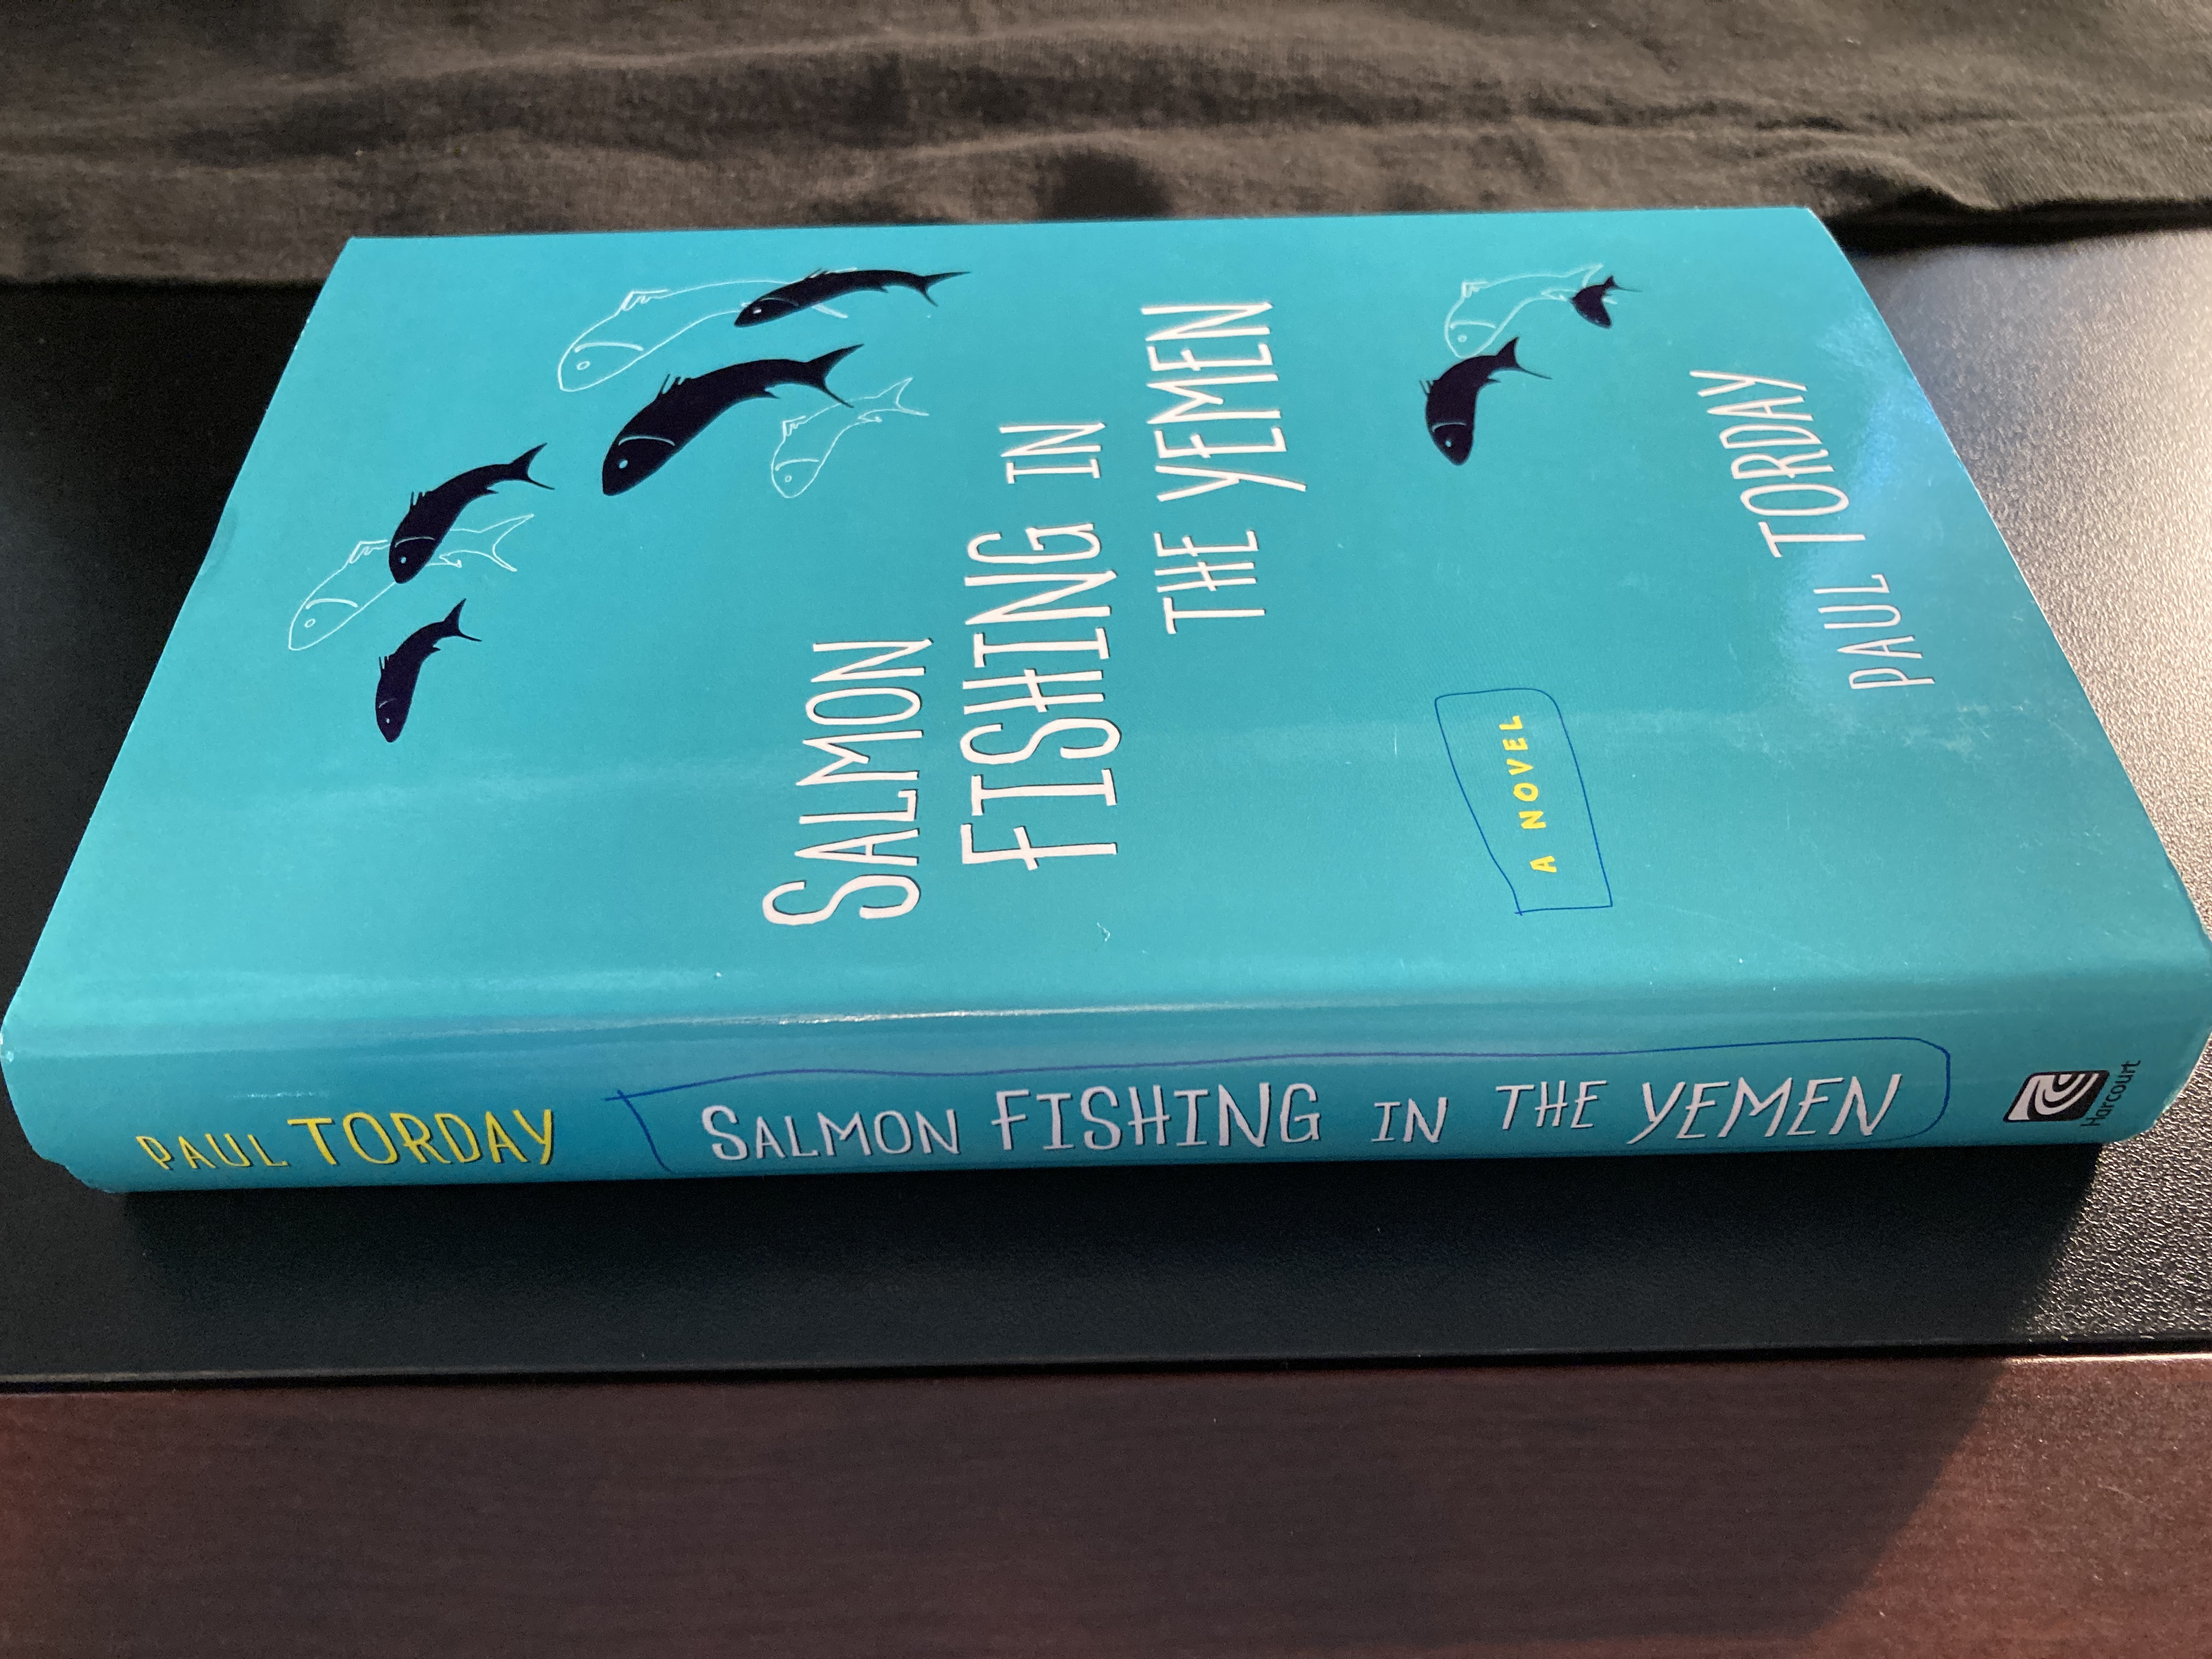 Salmon Fishing in the Yemen, First Edition, New by Torday, Paul: New  Hardcover (2007) 1st Edition